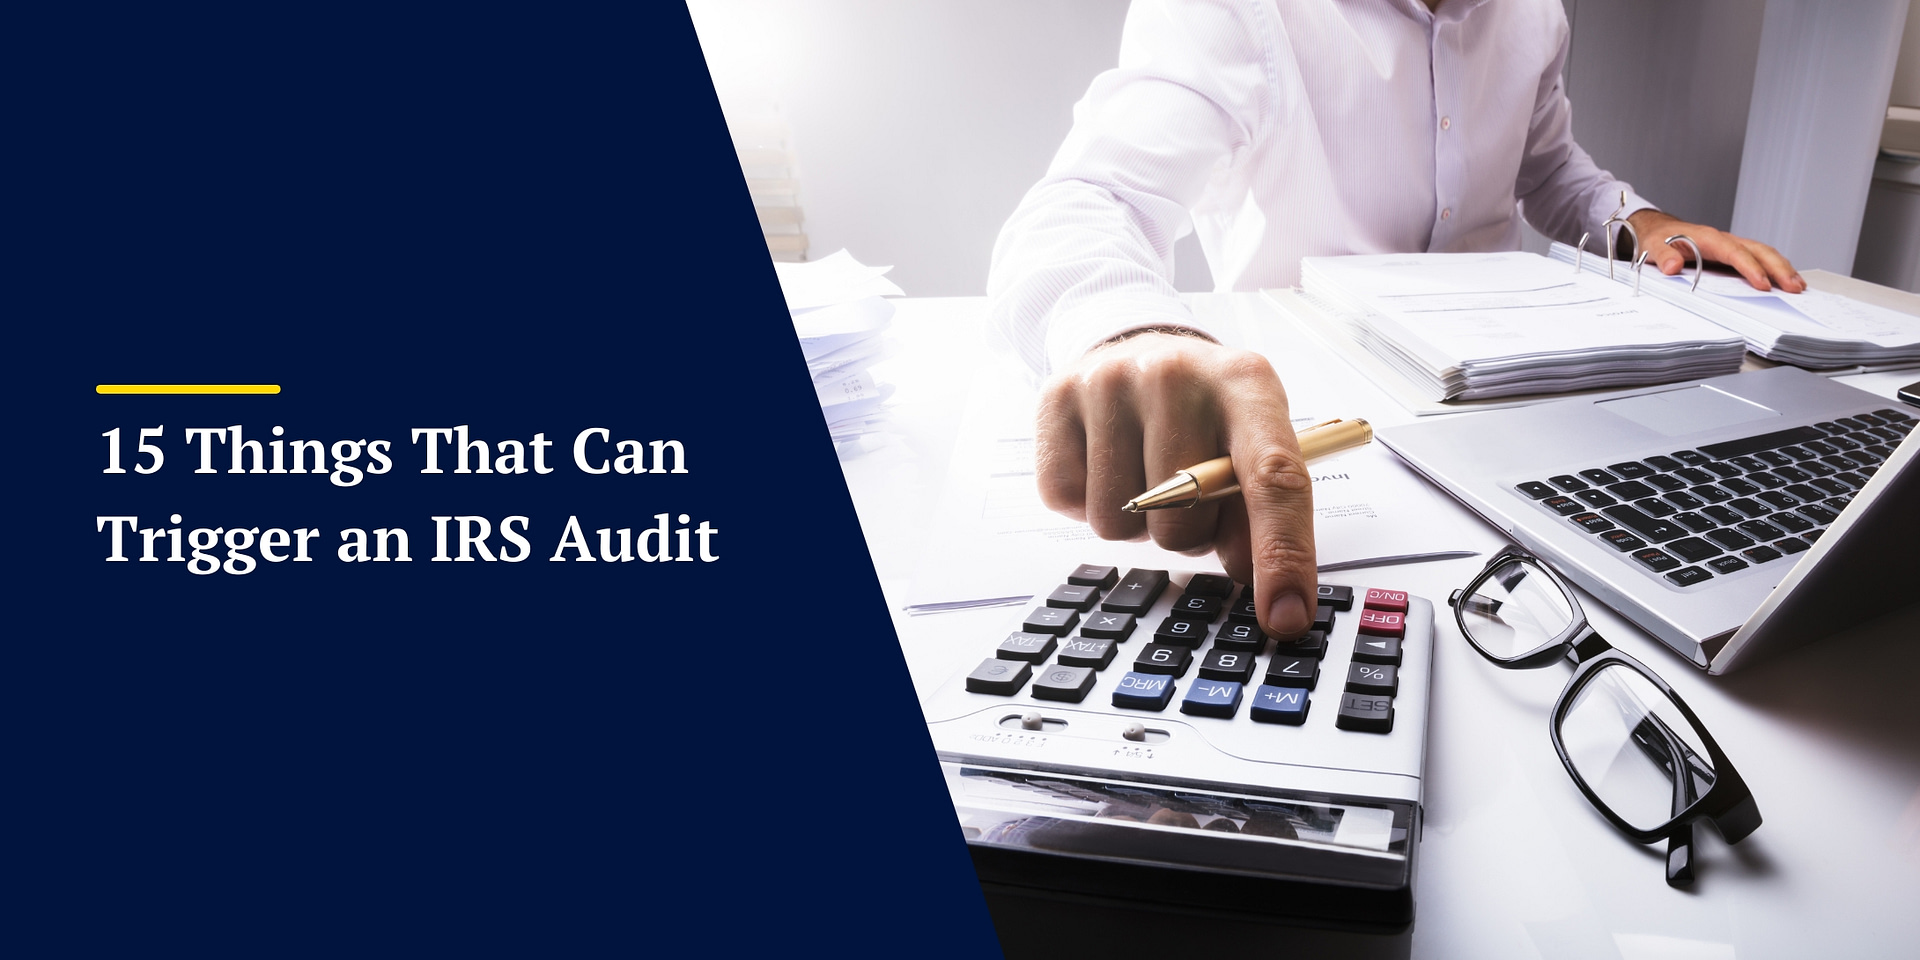 15 Things That Can Trigger IRS Audit